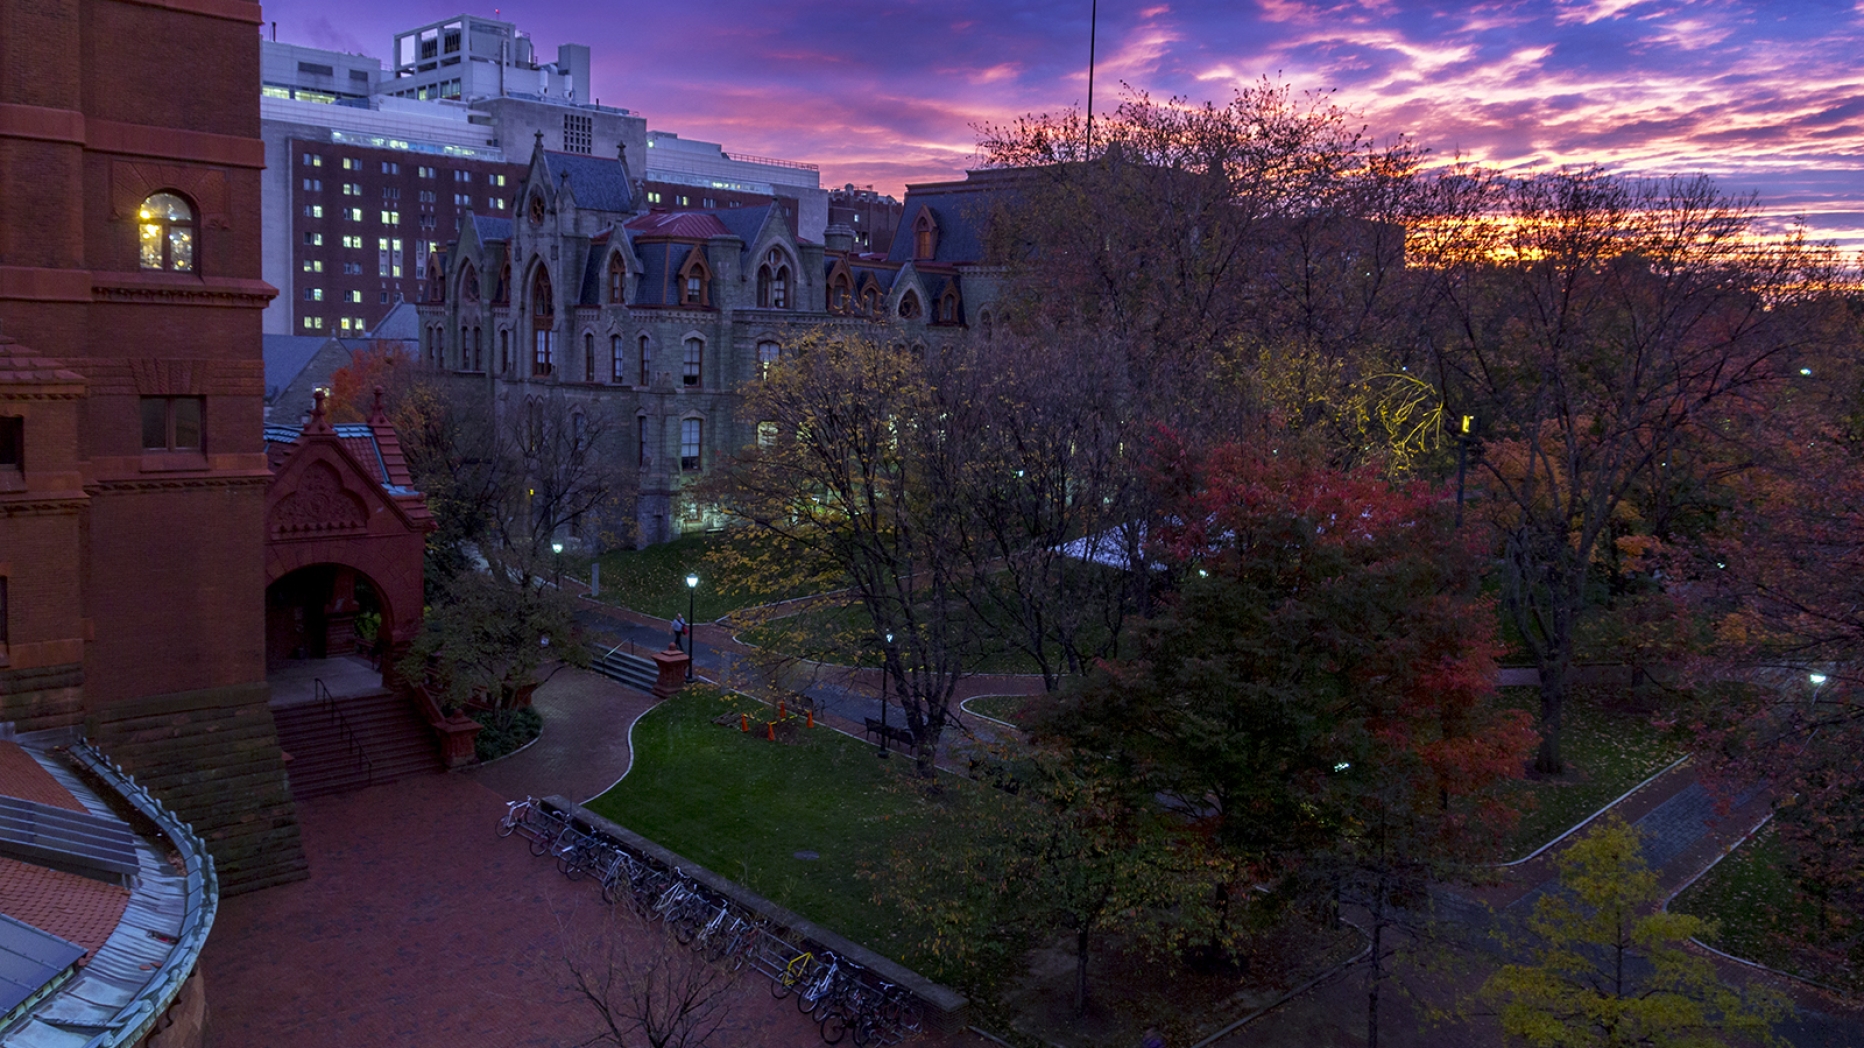 UPenn campus at sunset.